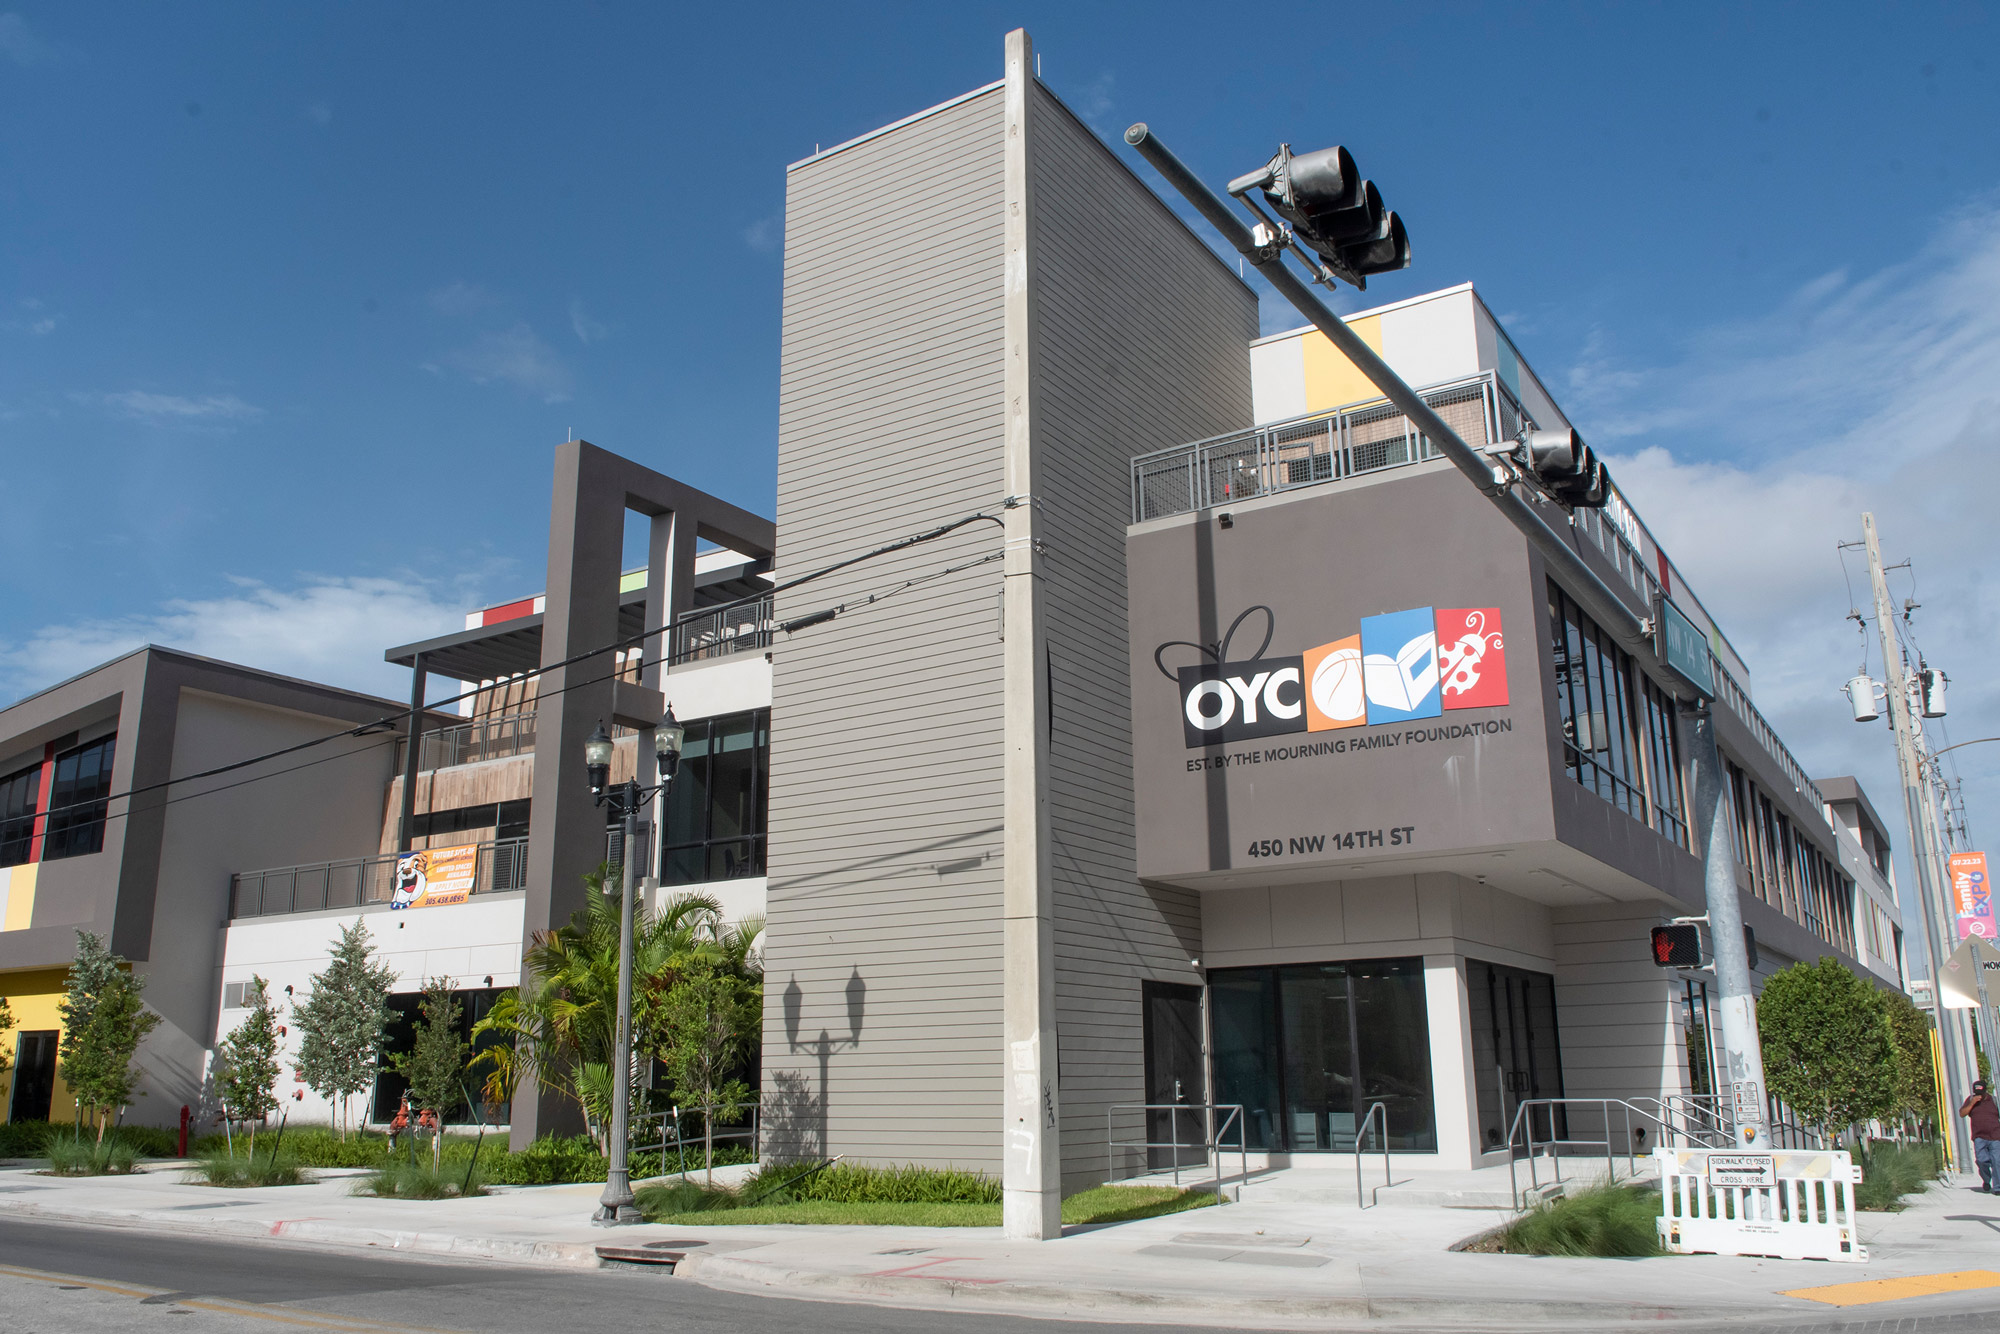 photo of the front exterior of the new OYC facility in Overtown.